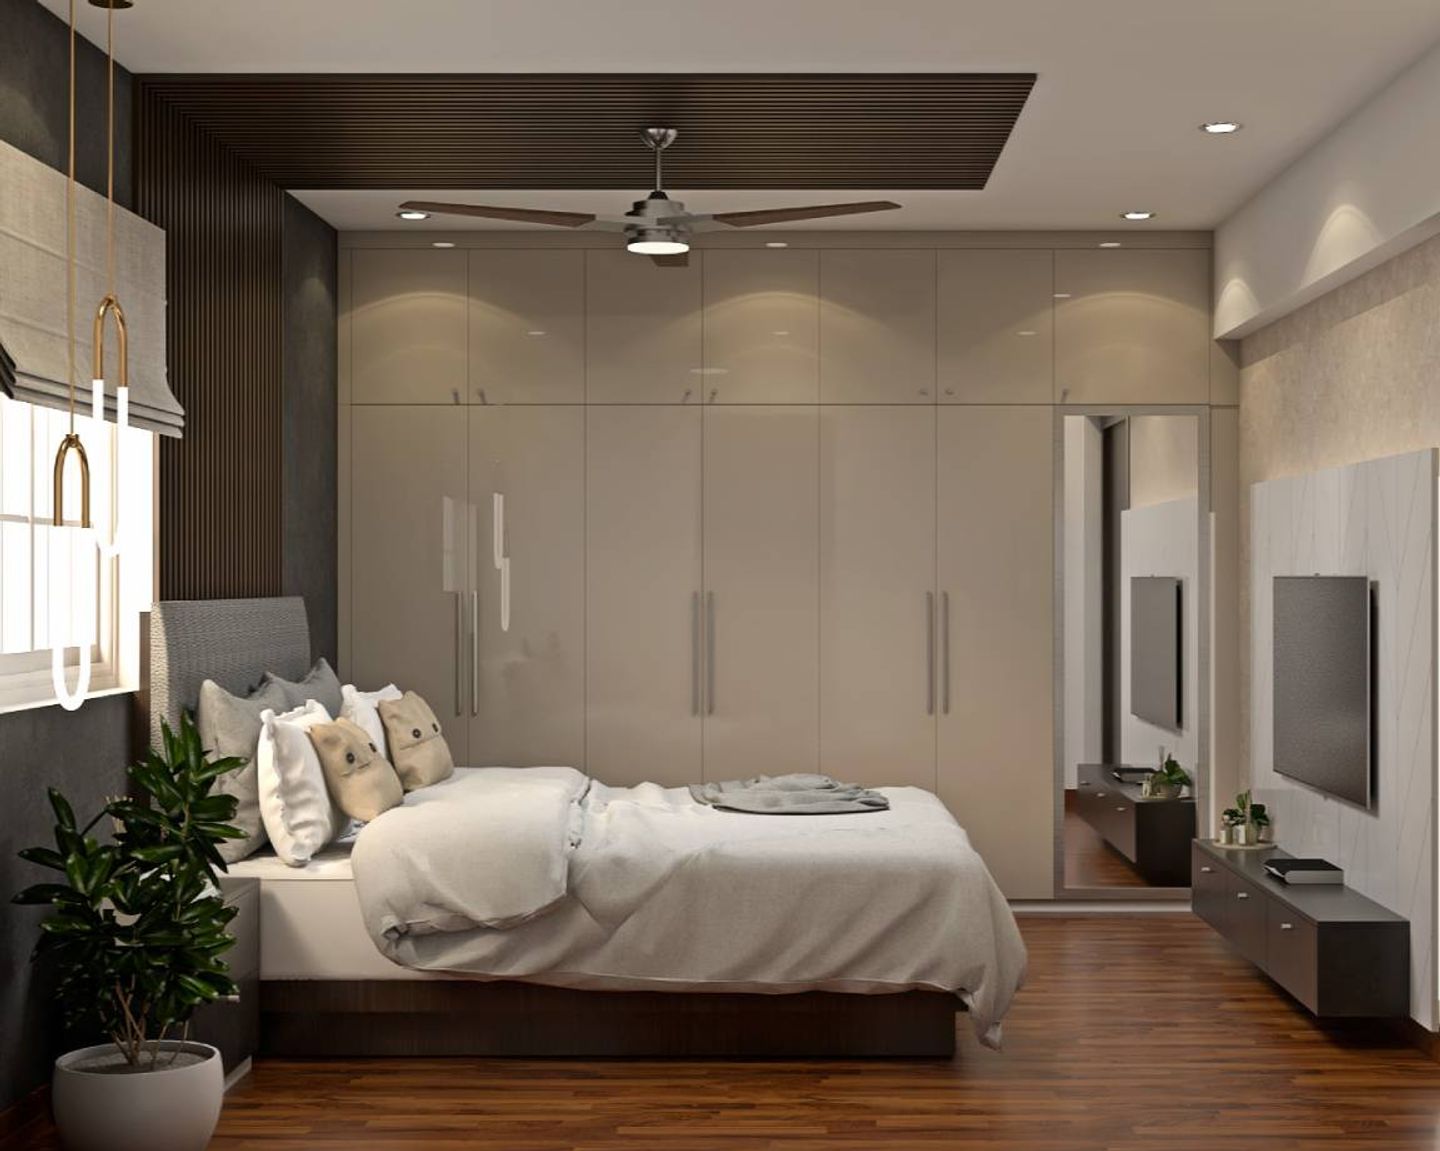 Modern Guest Room Design With A Wooden King Size Bed